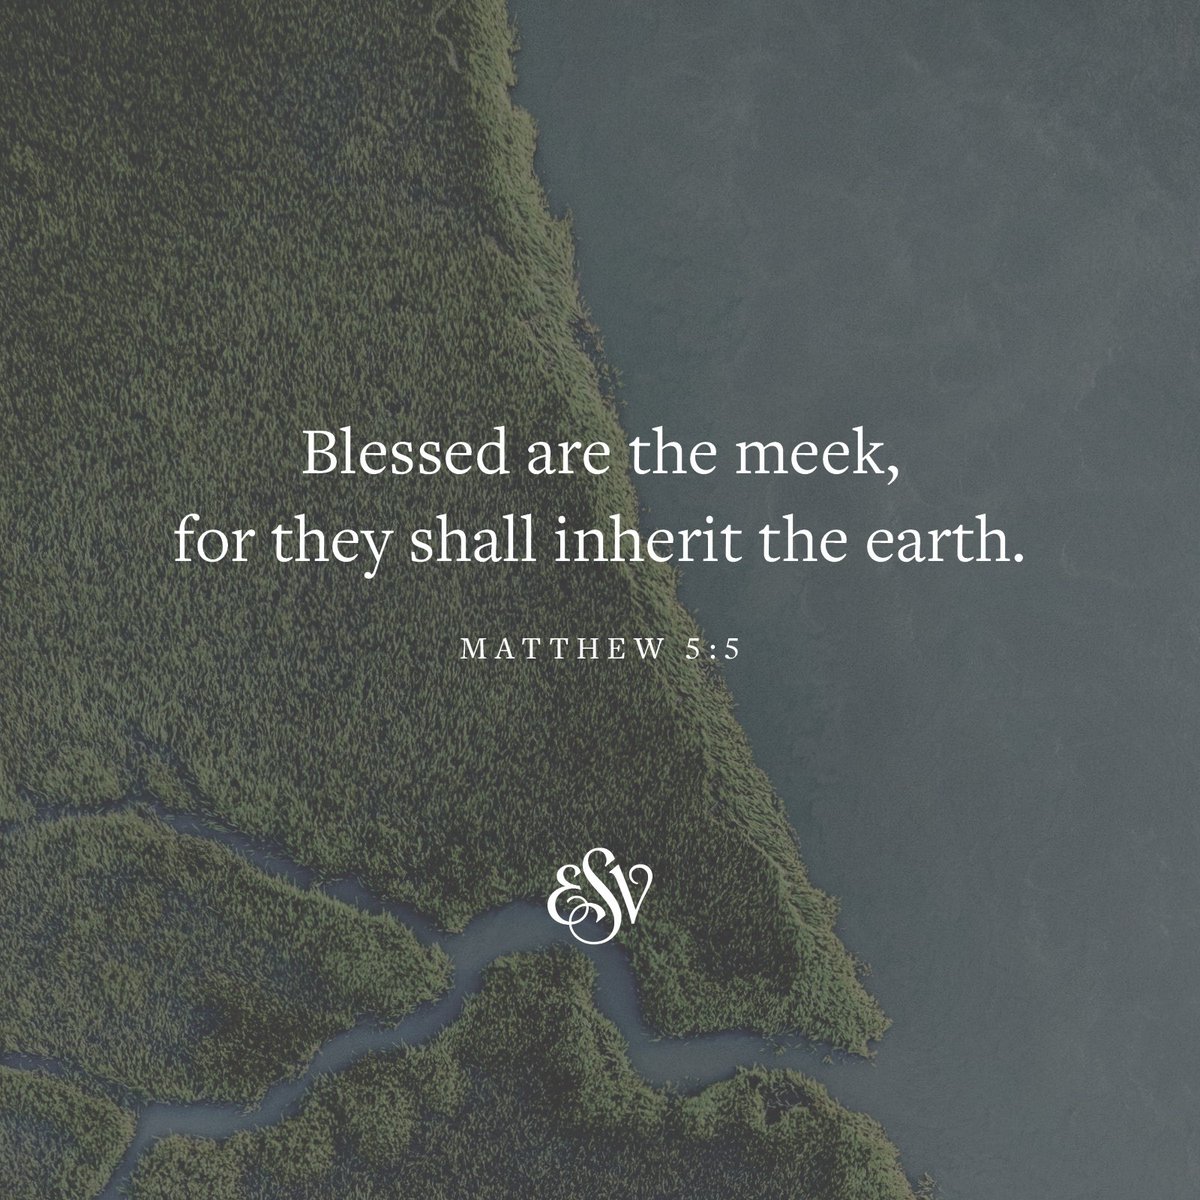 Blessed are the meek, for they shall inherit the earth. 
—Matthew 5:5 ESV.org

#Verseoftheday #ESV #Scripturememoryverse #Bible